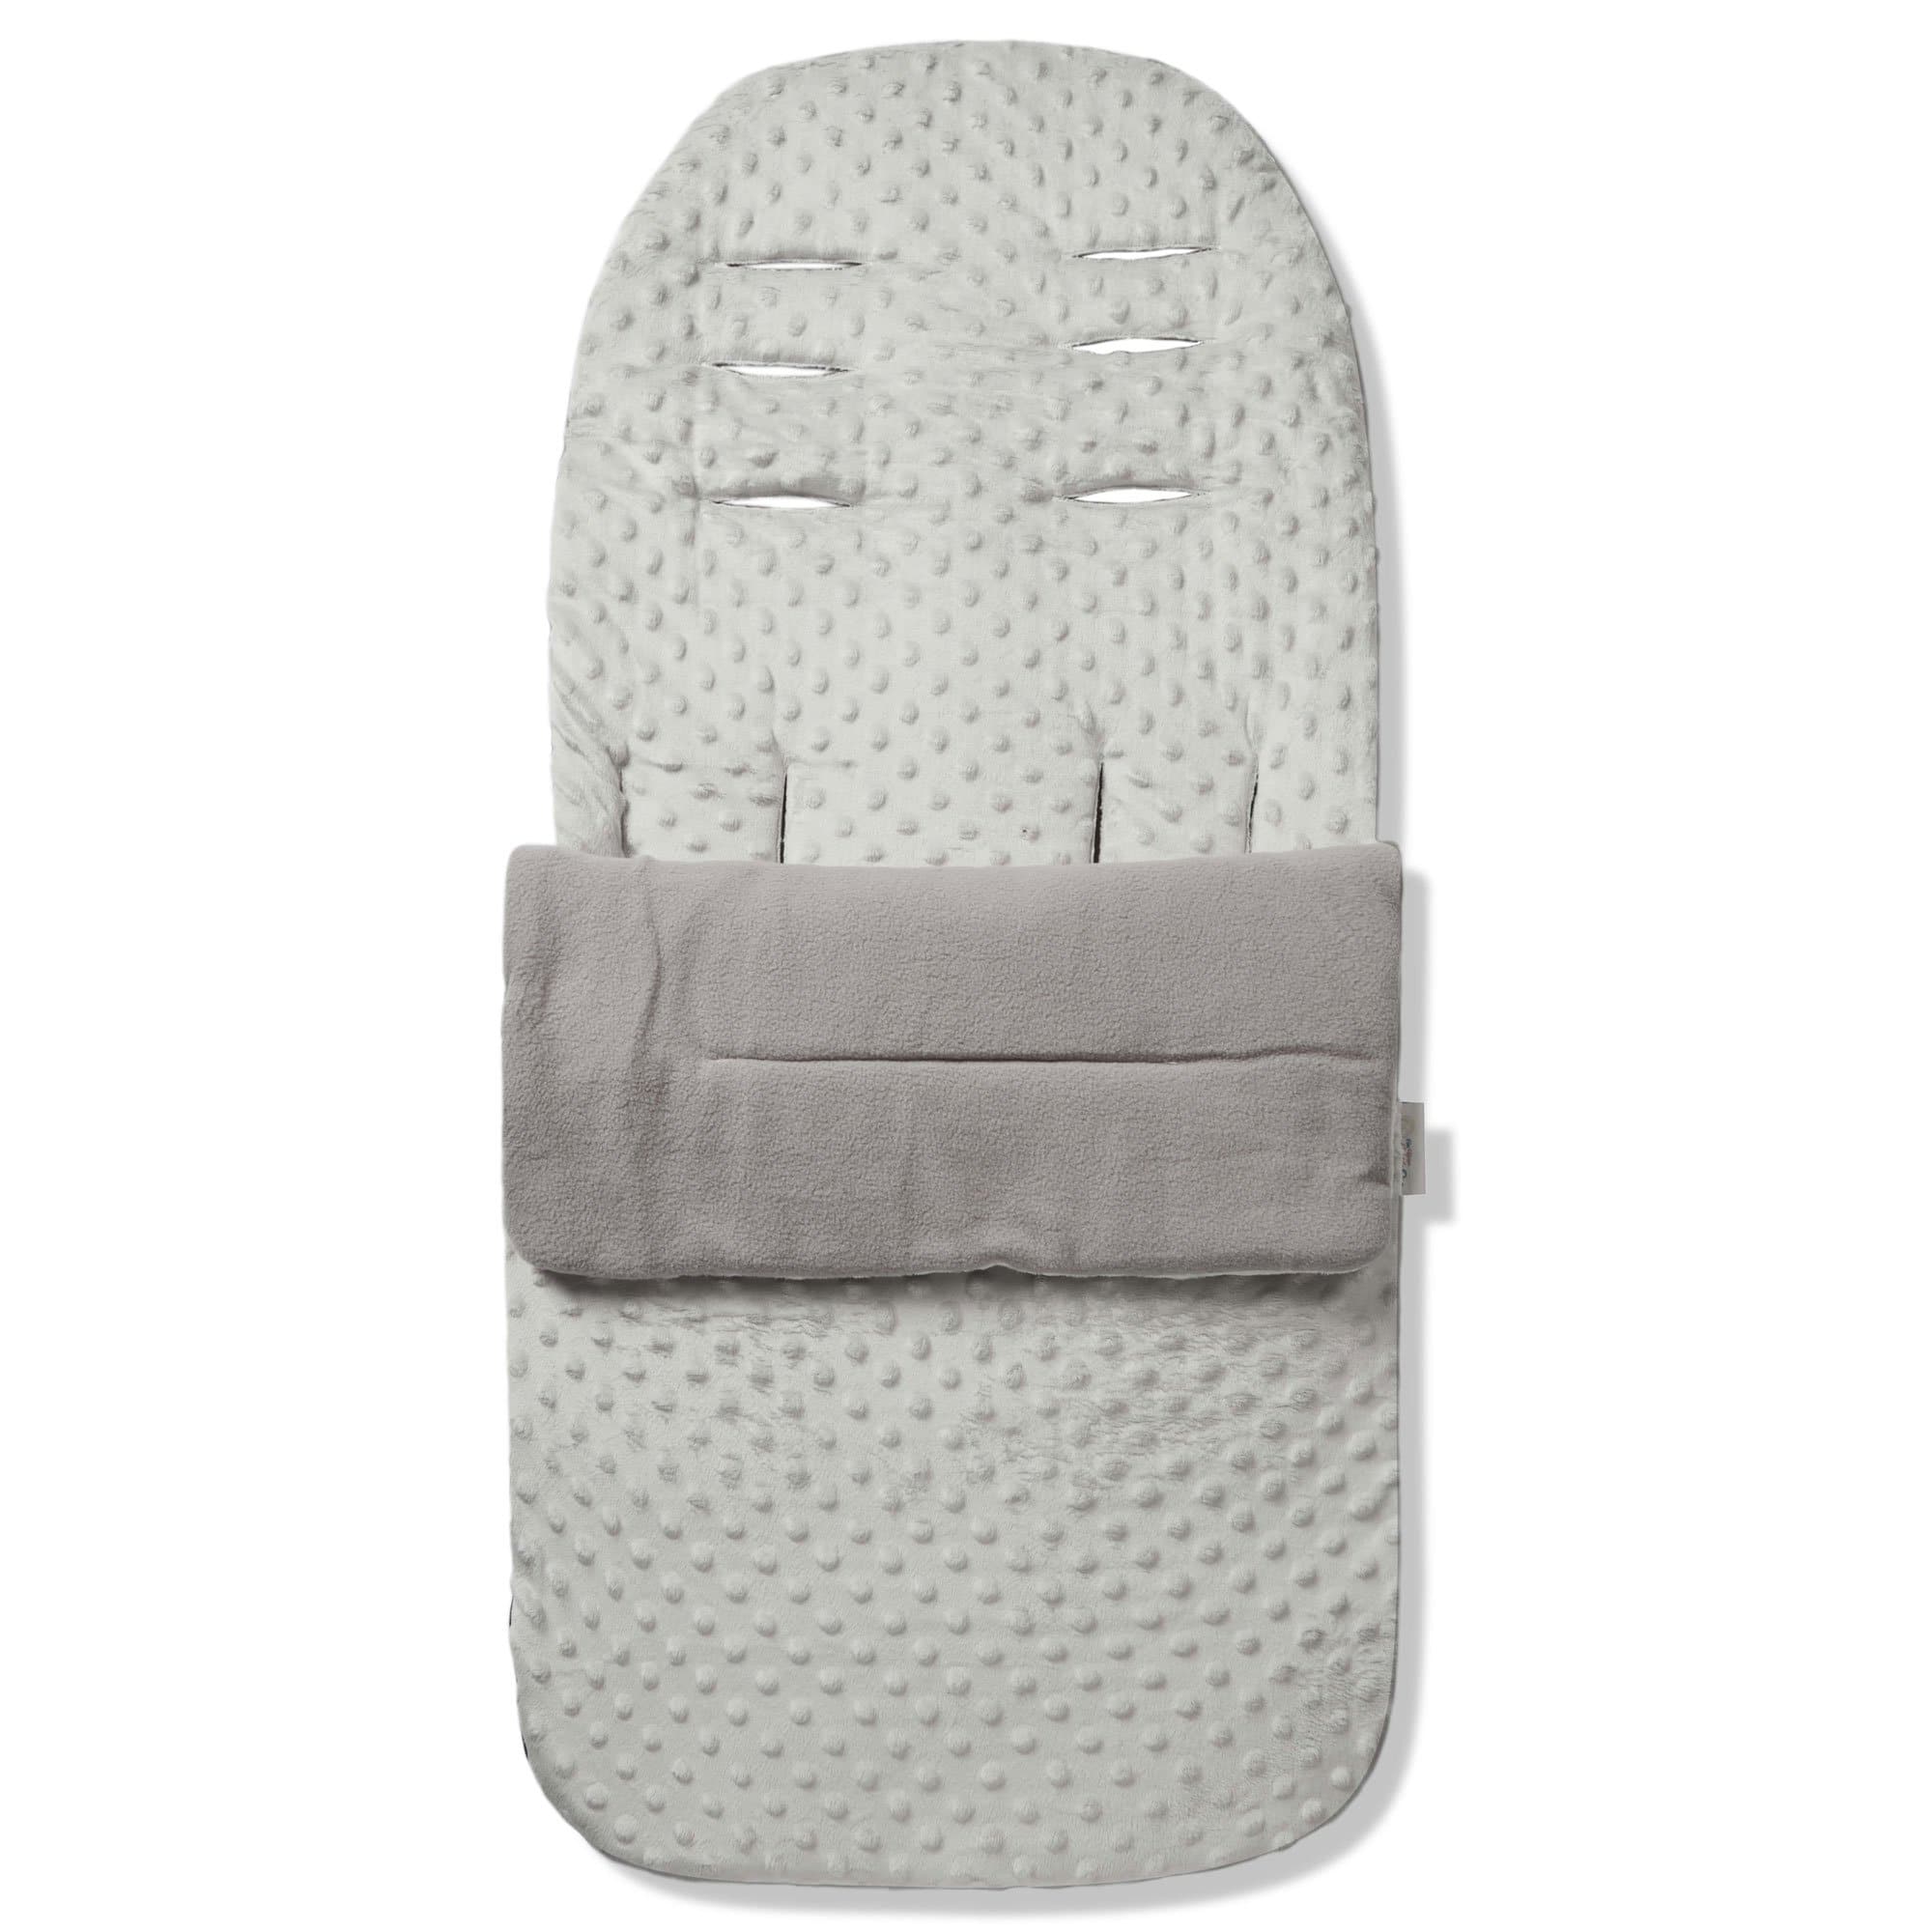 Dimple Footmuff / Cosy Toes Compatible with Mountain Buggy - Grey / Fits All Models | For Your Little One